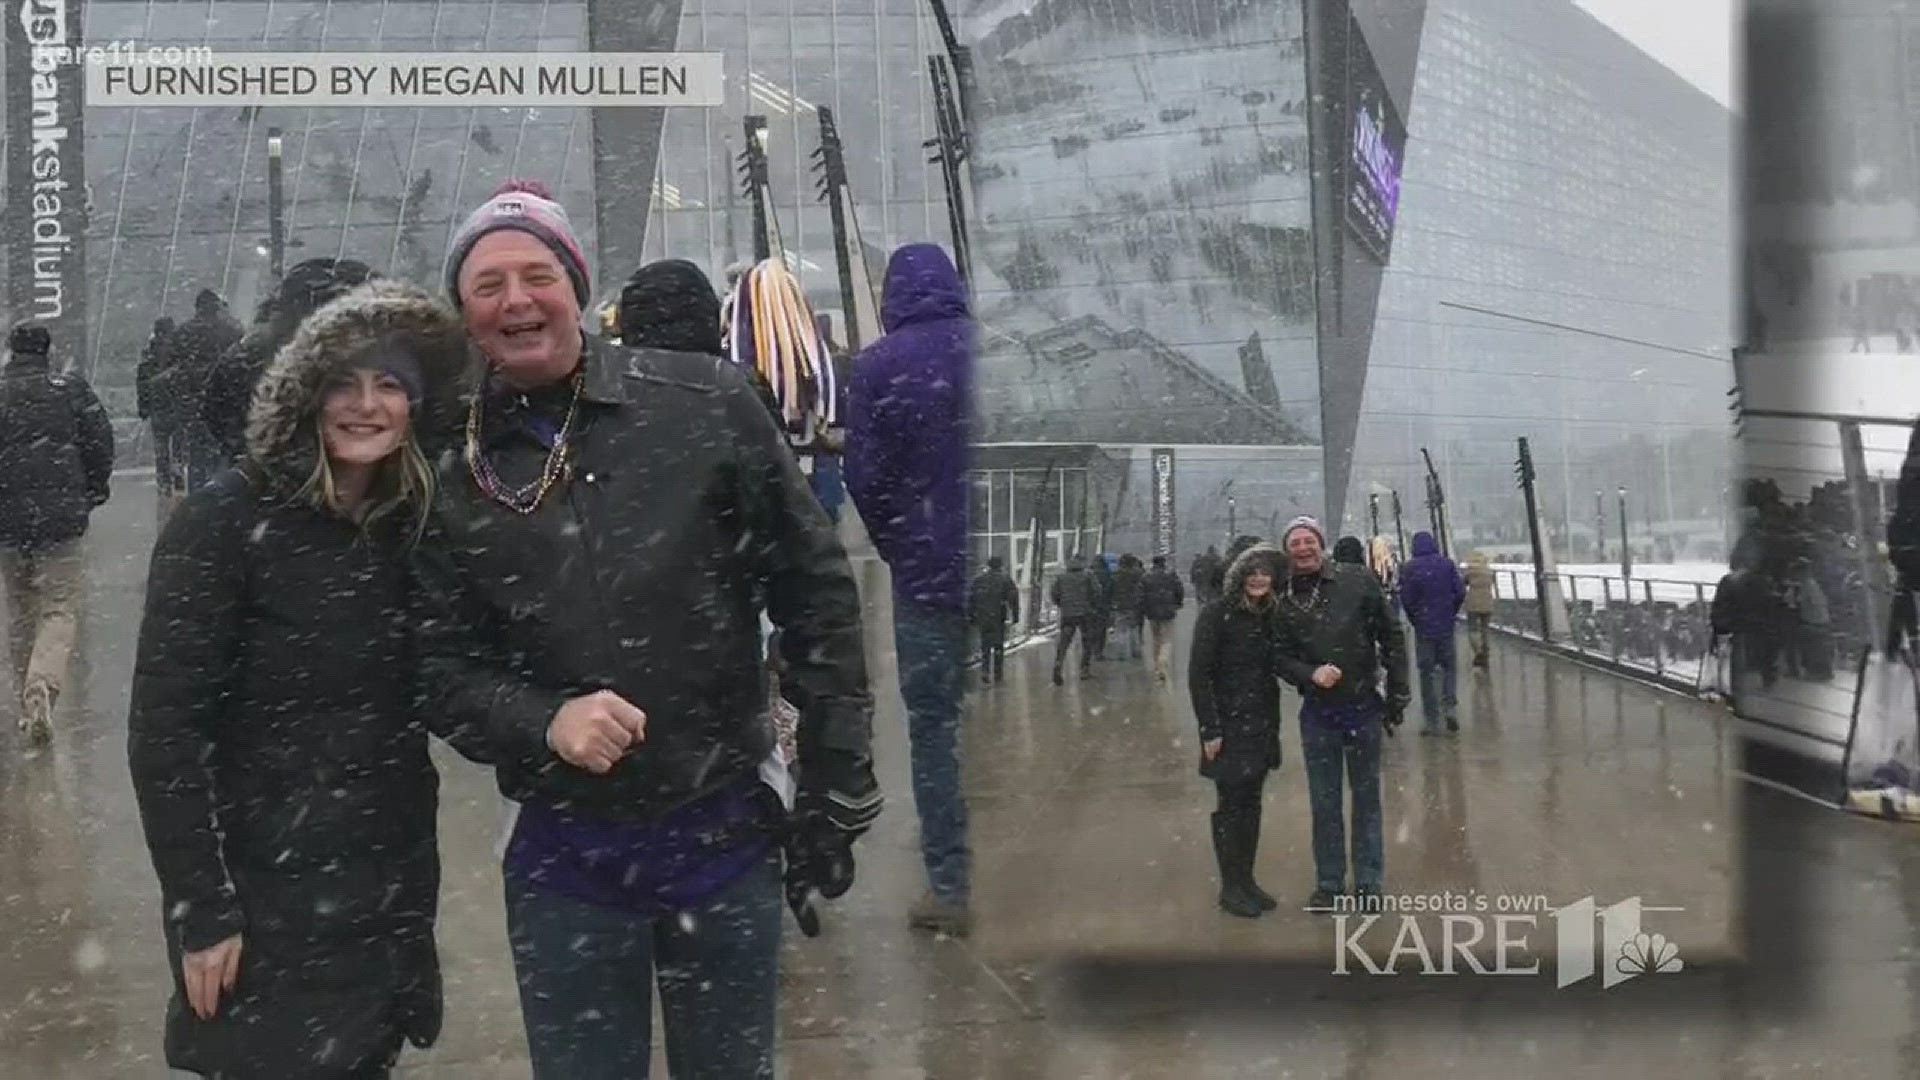 When the Saints hit a field goal to take the lead with 25 seconds left, many Vikings fans left the stadium thinking the Vikes would lose. http://kare11.tv/2DdYNlk